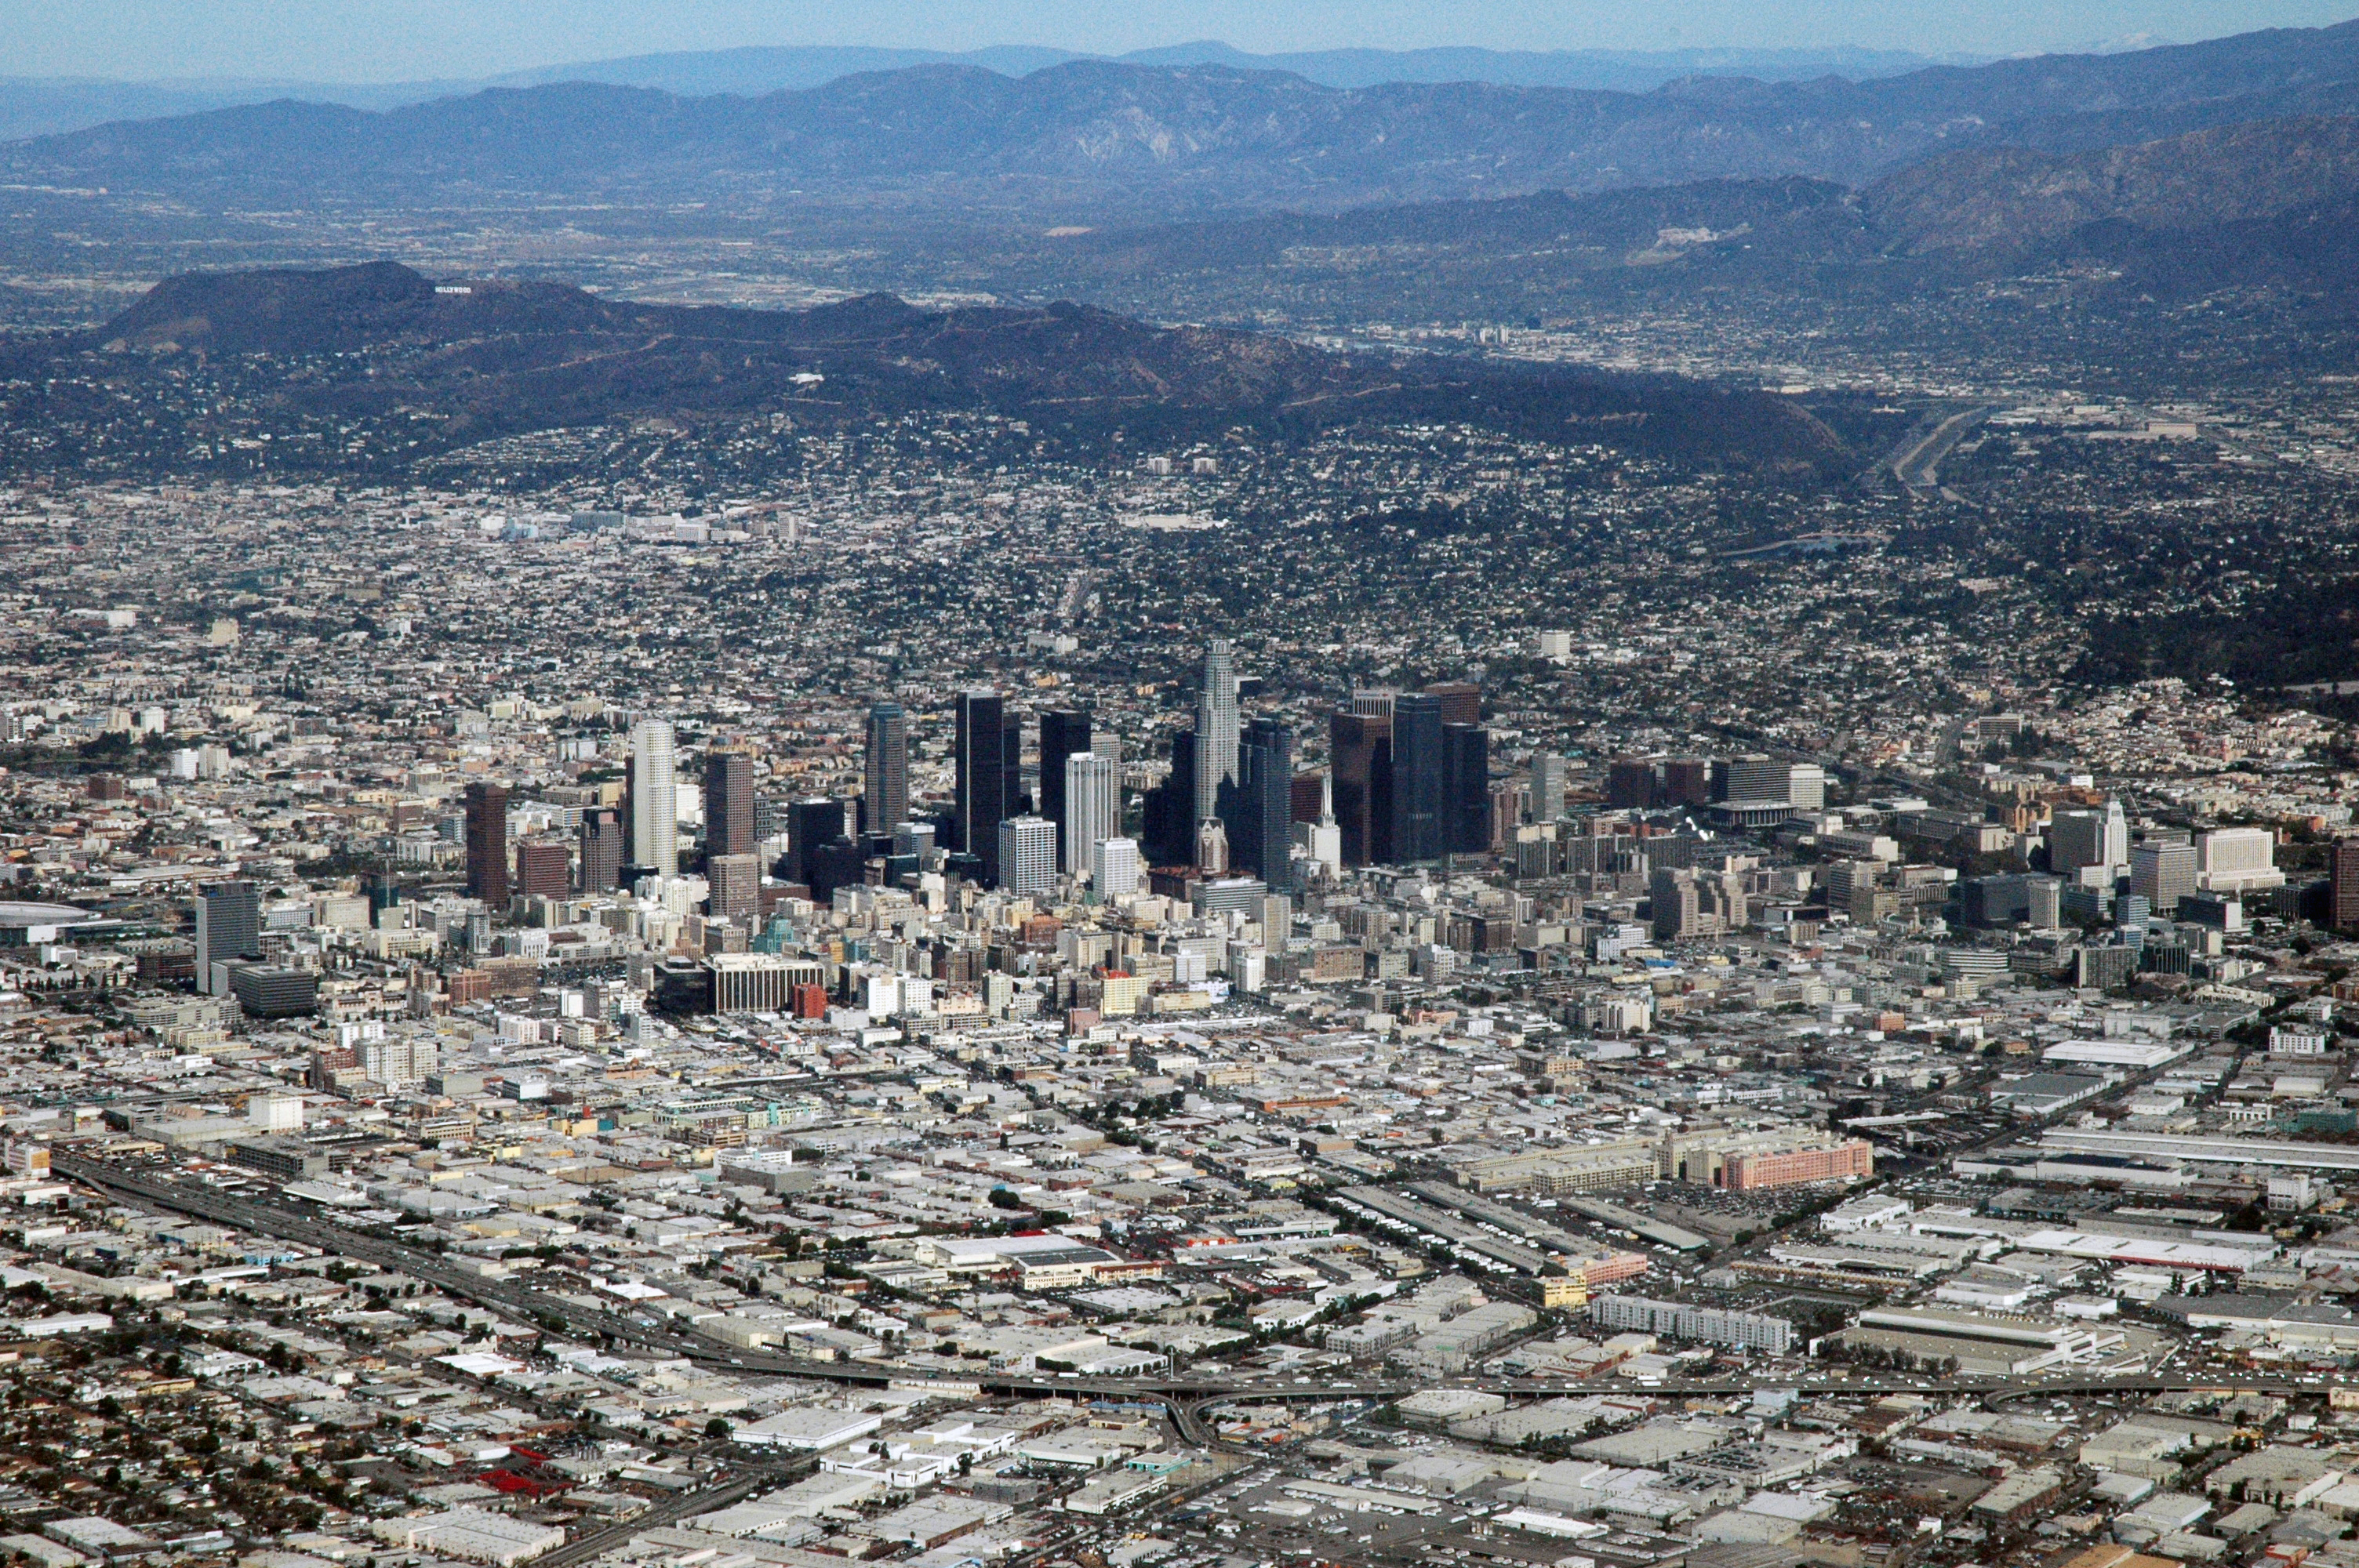 Los_Angeles,_CA_from_the_air